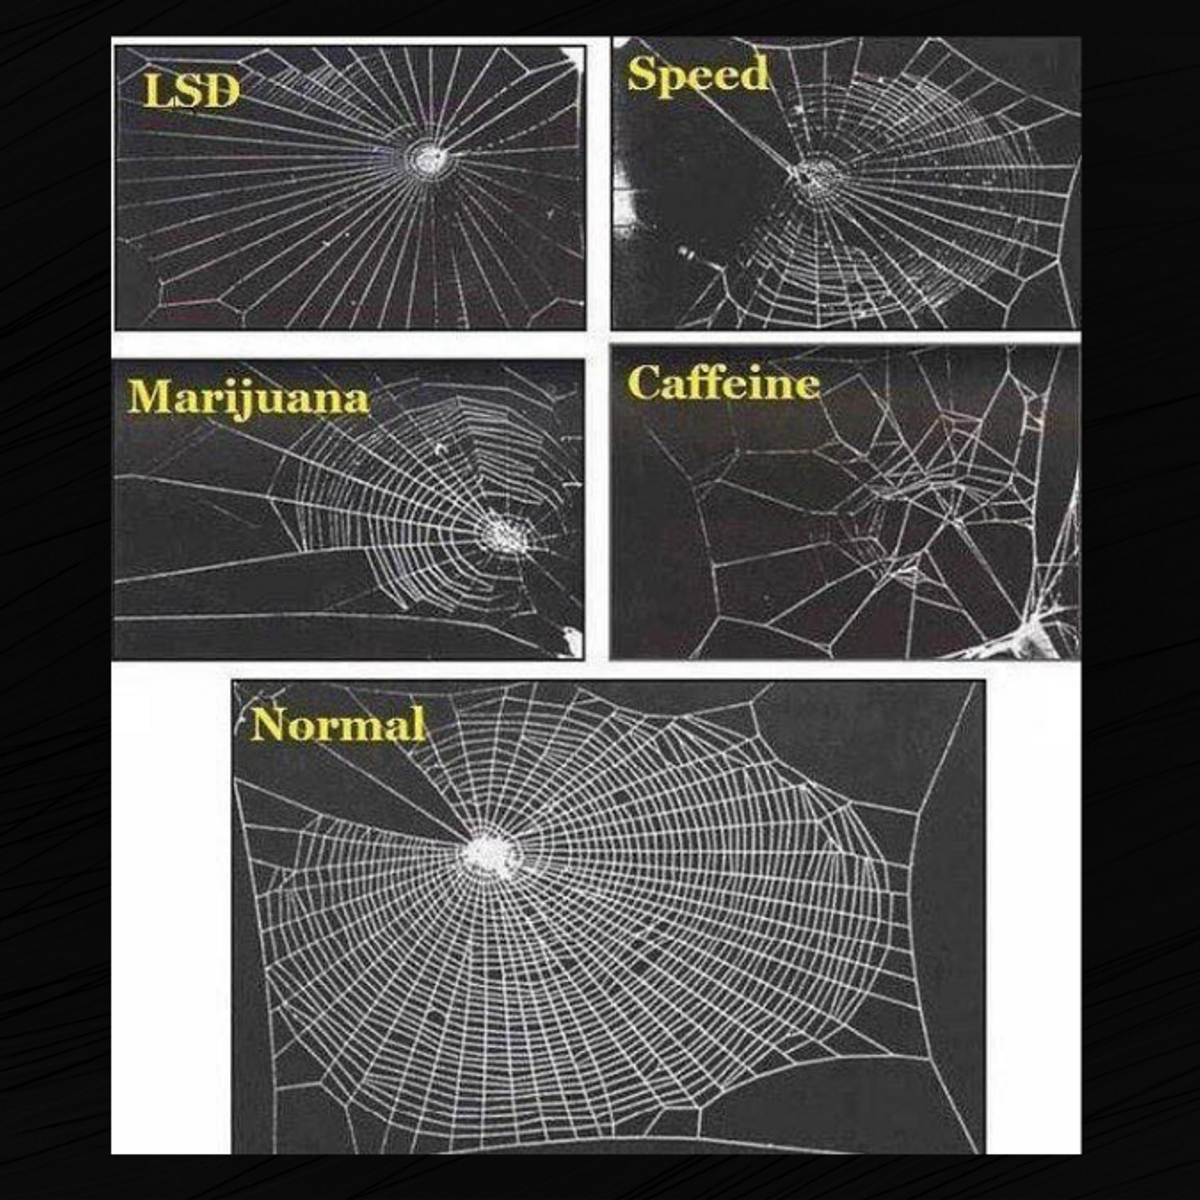 Was One of These Webs Spun by an LSD-Tripping Spider? | Snopes.com